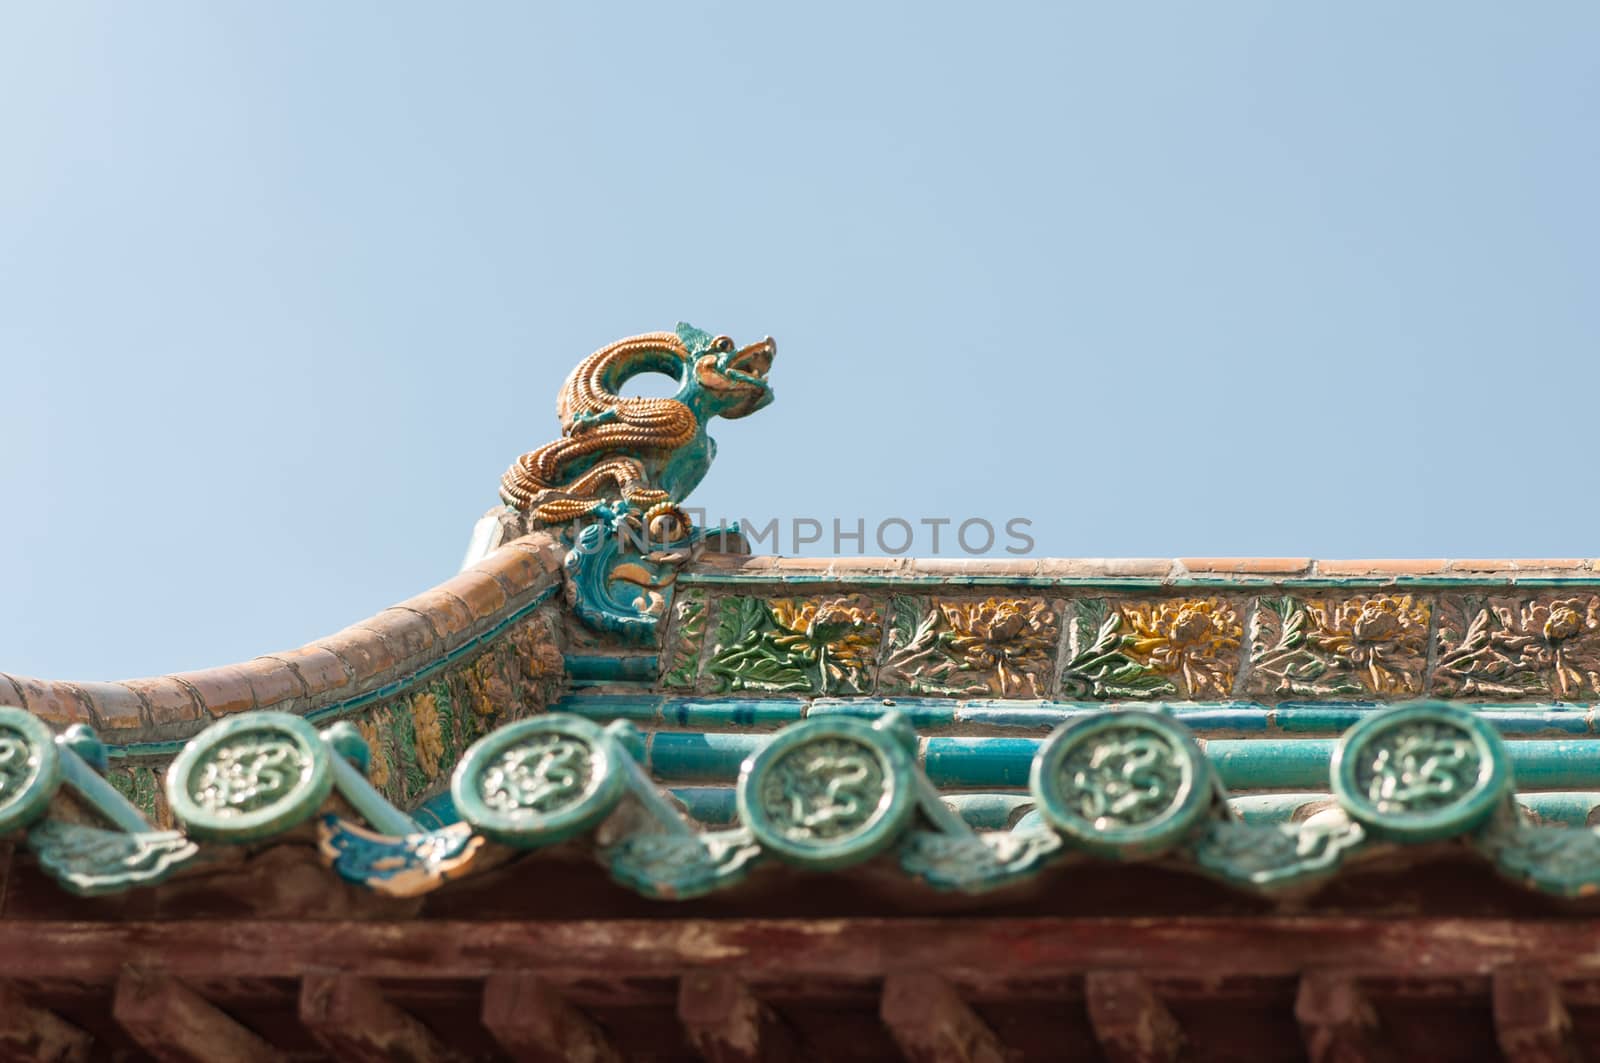 The horizontal view of the Chinese mythology dragon on the roof